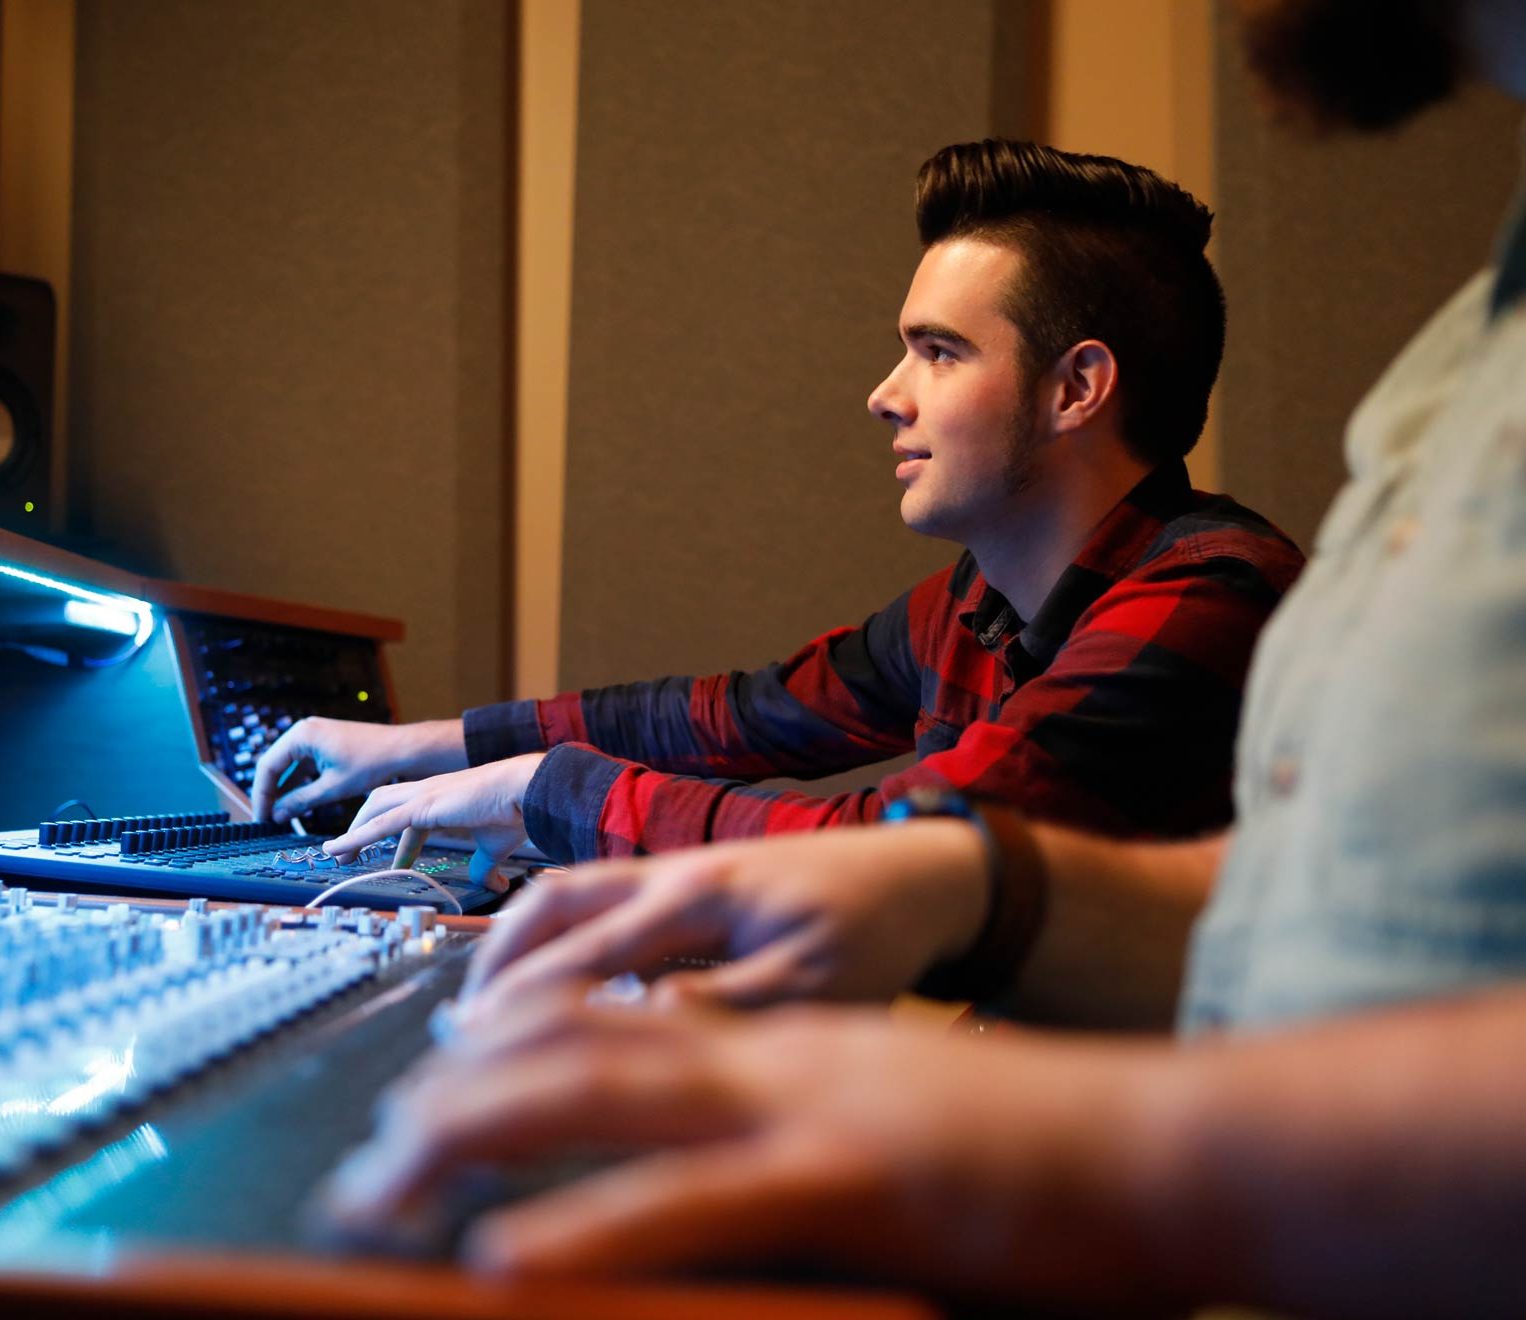 Student works at a mixing console